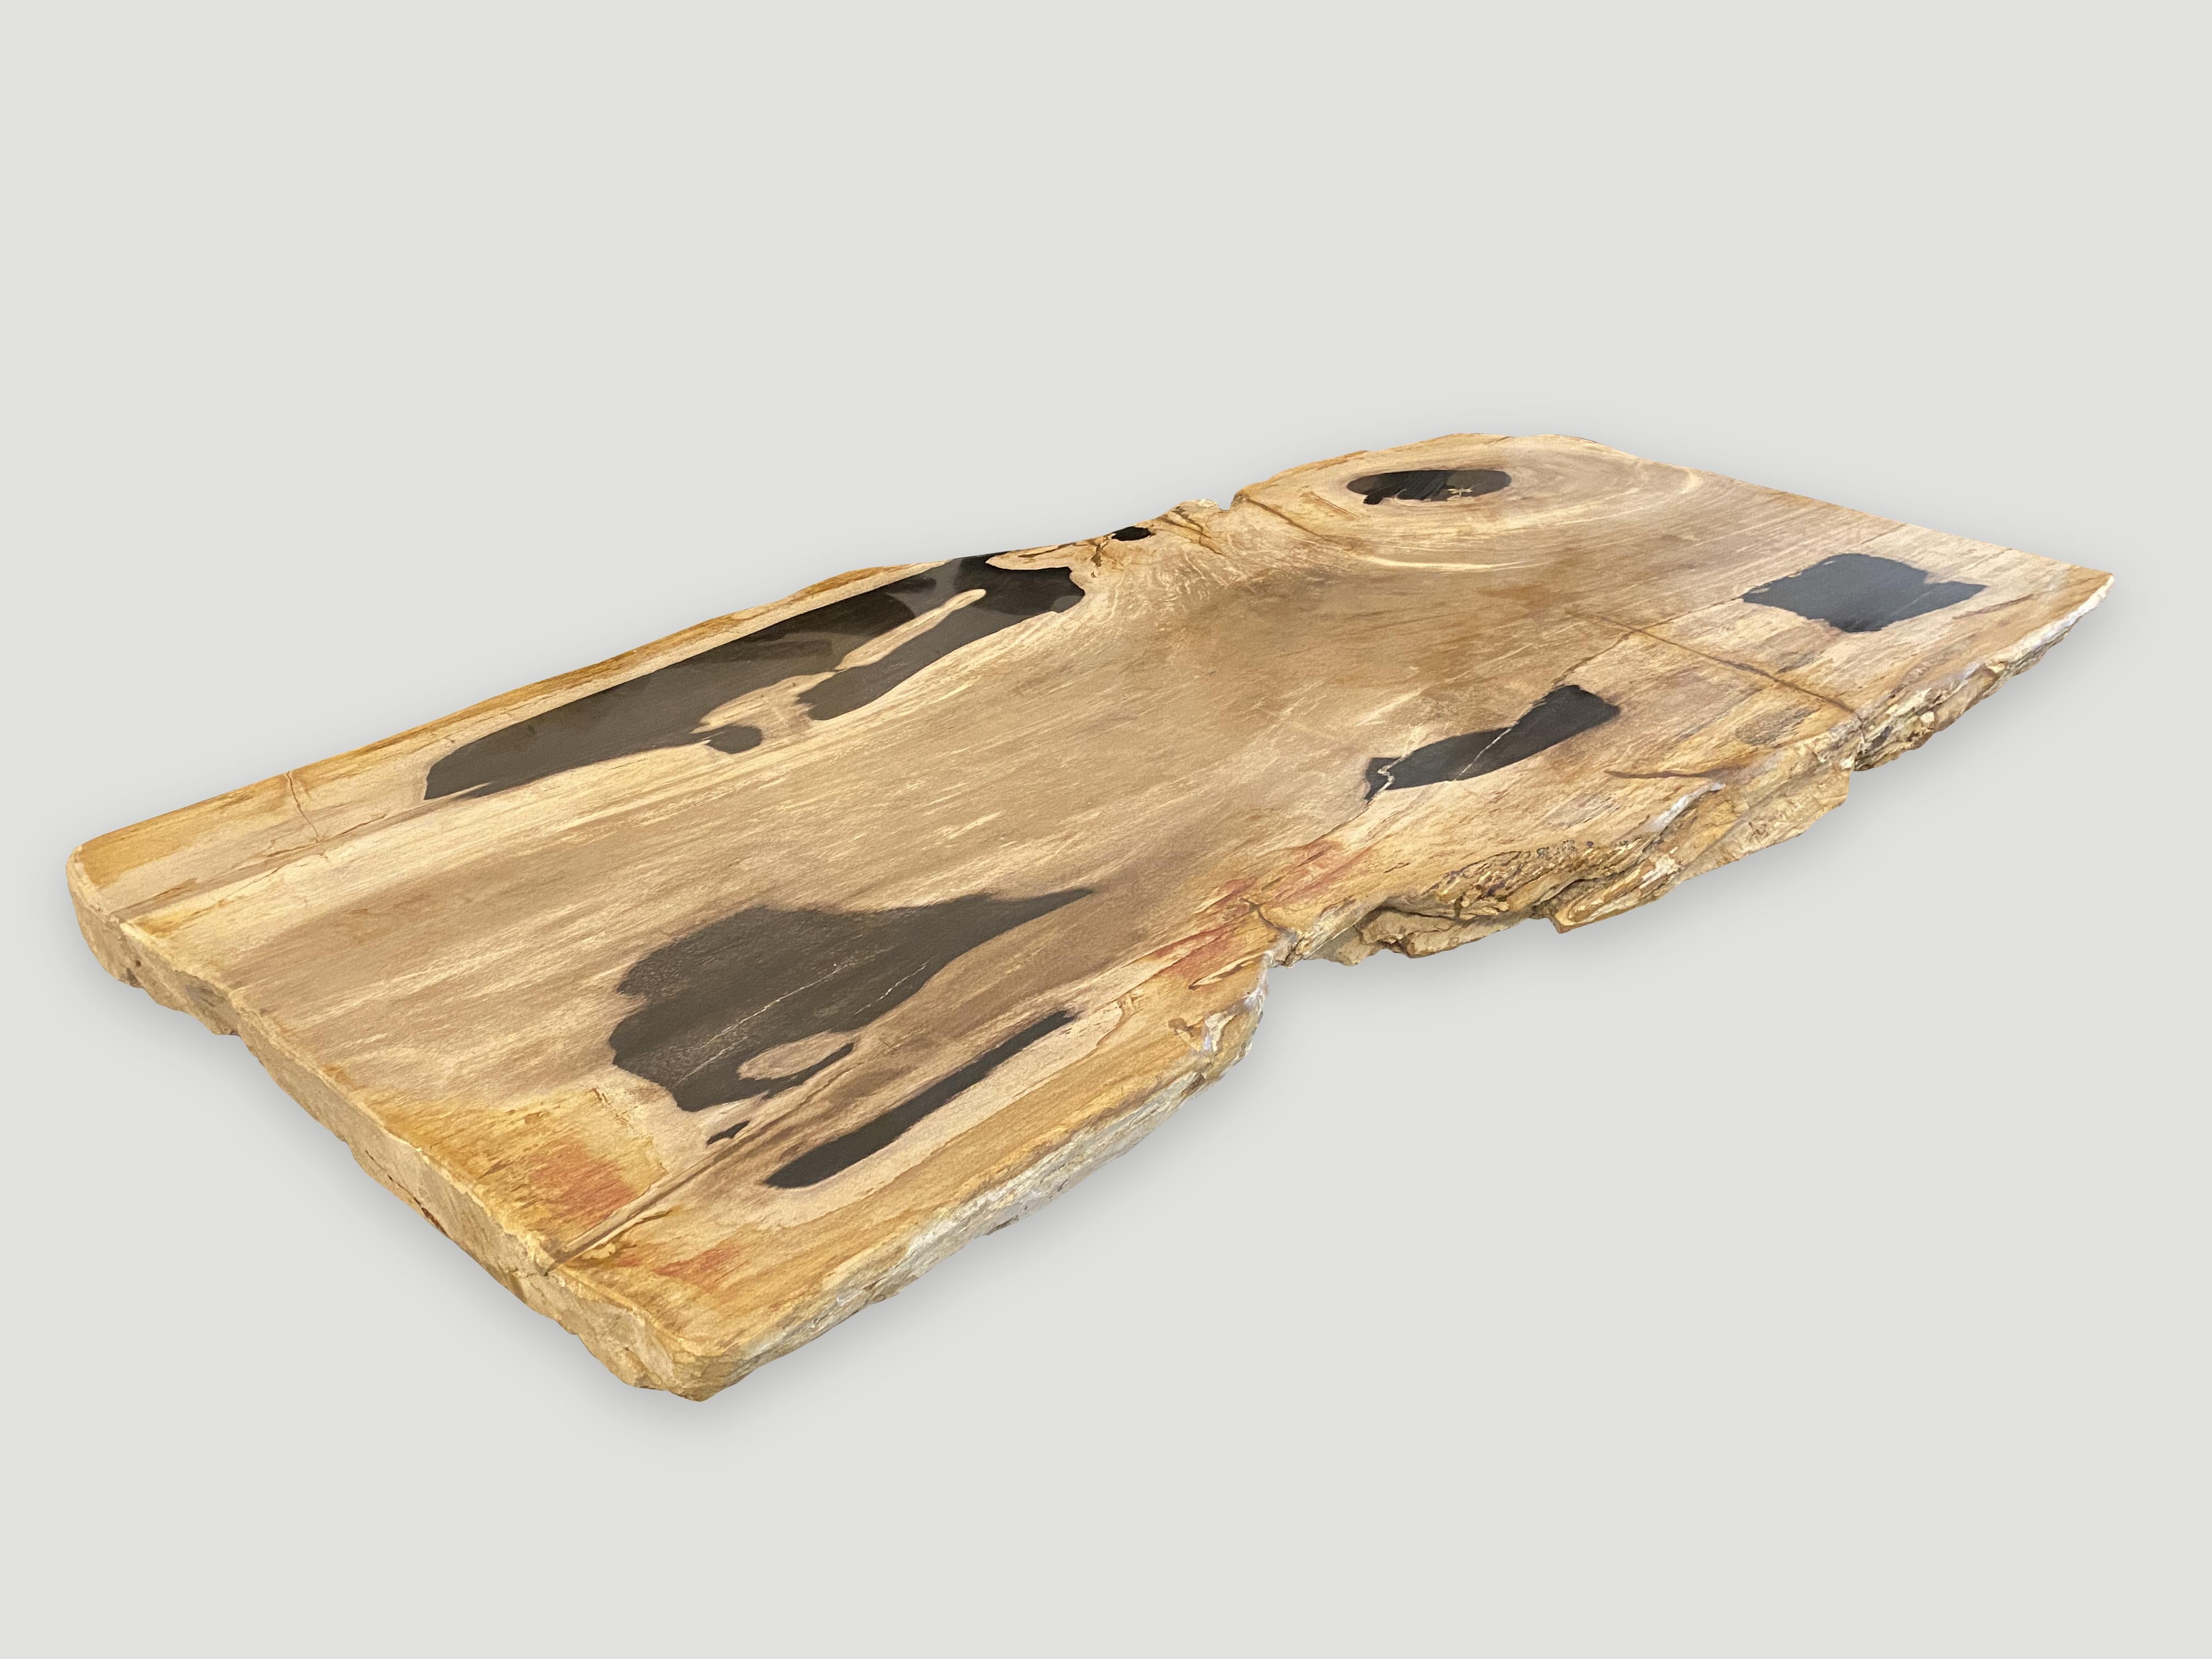 Andrianna Shamaris Impressive Petrified Wood Single Slab In Excellent Condition For Sale In New York, NY